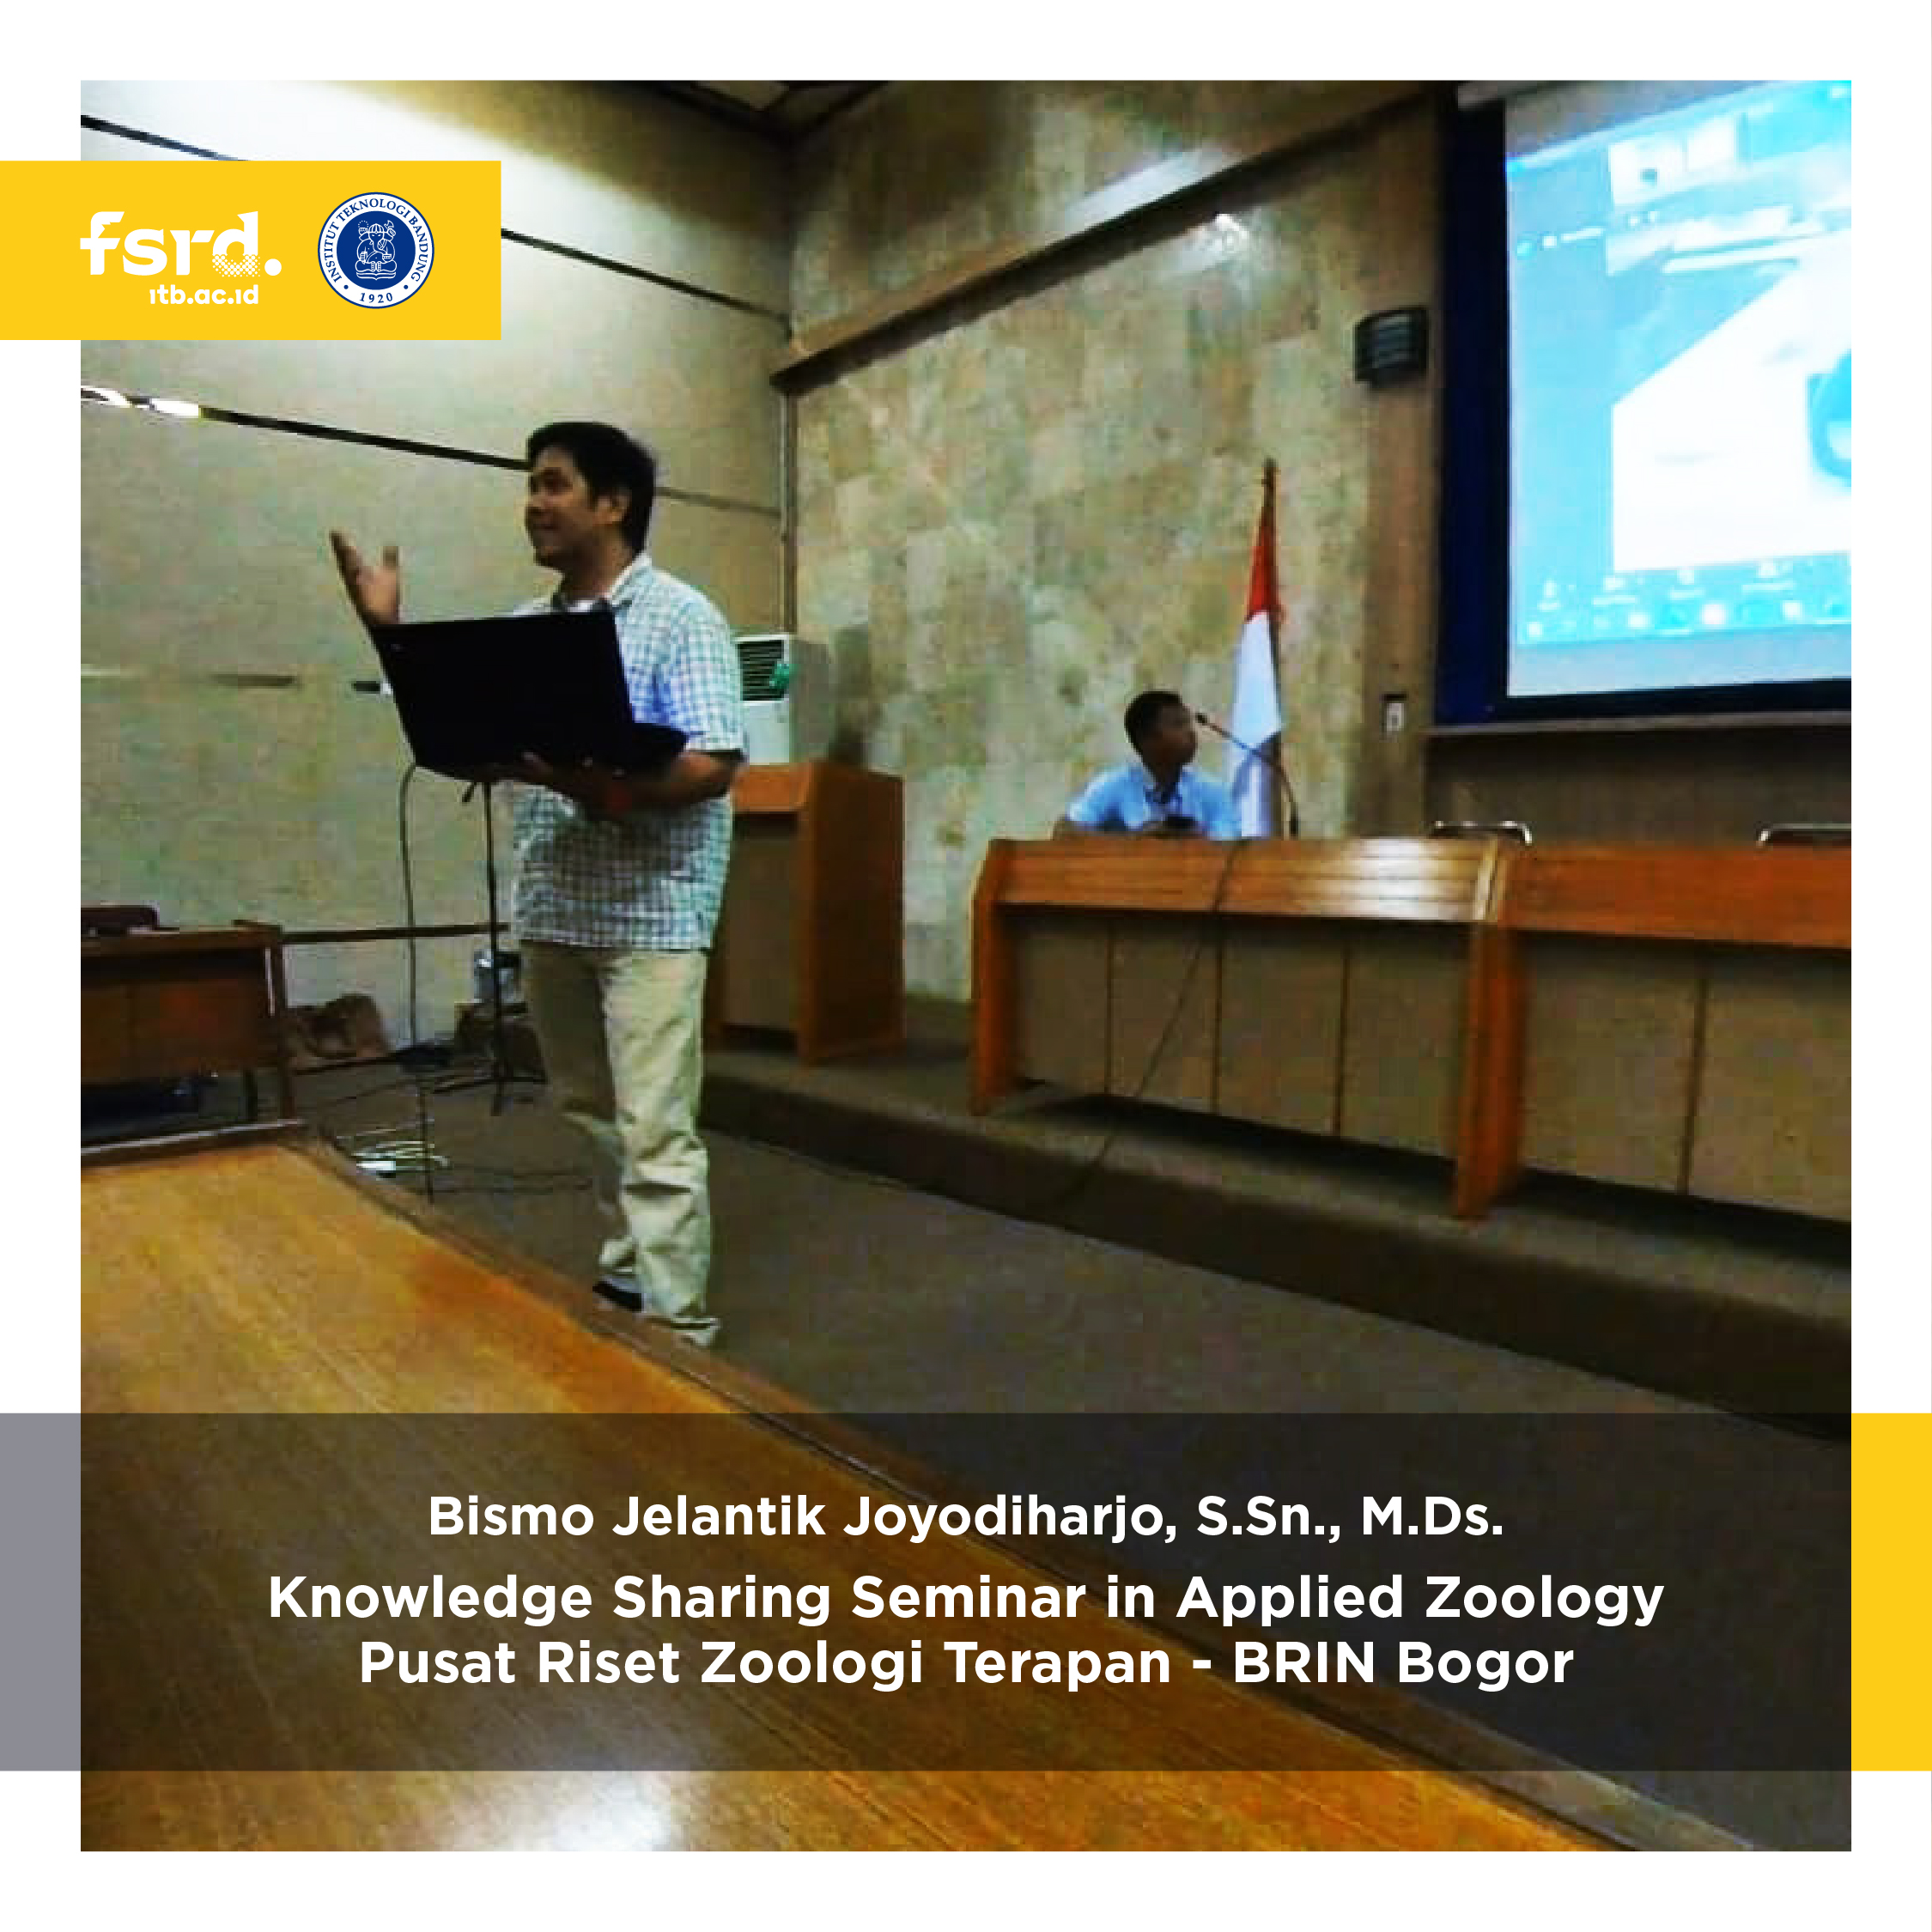 Bismo Jelantik Joyodiharjo, S.Sn., M.Ds. in Knowledge Sharing Seminar in Applied Zoology with Research Center for Applied Zoology – BRIN Bogor